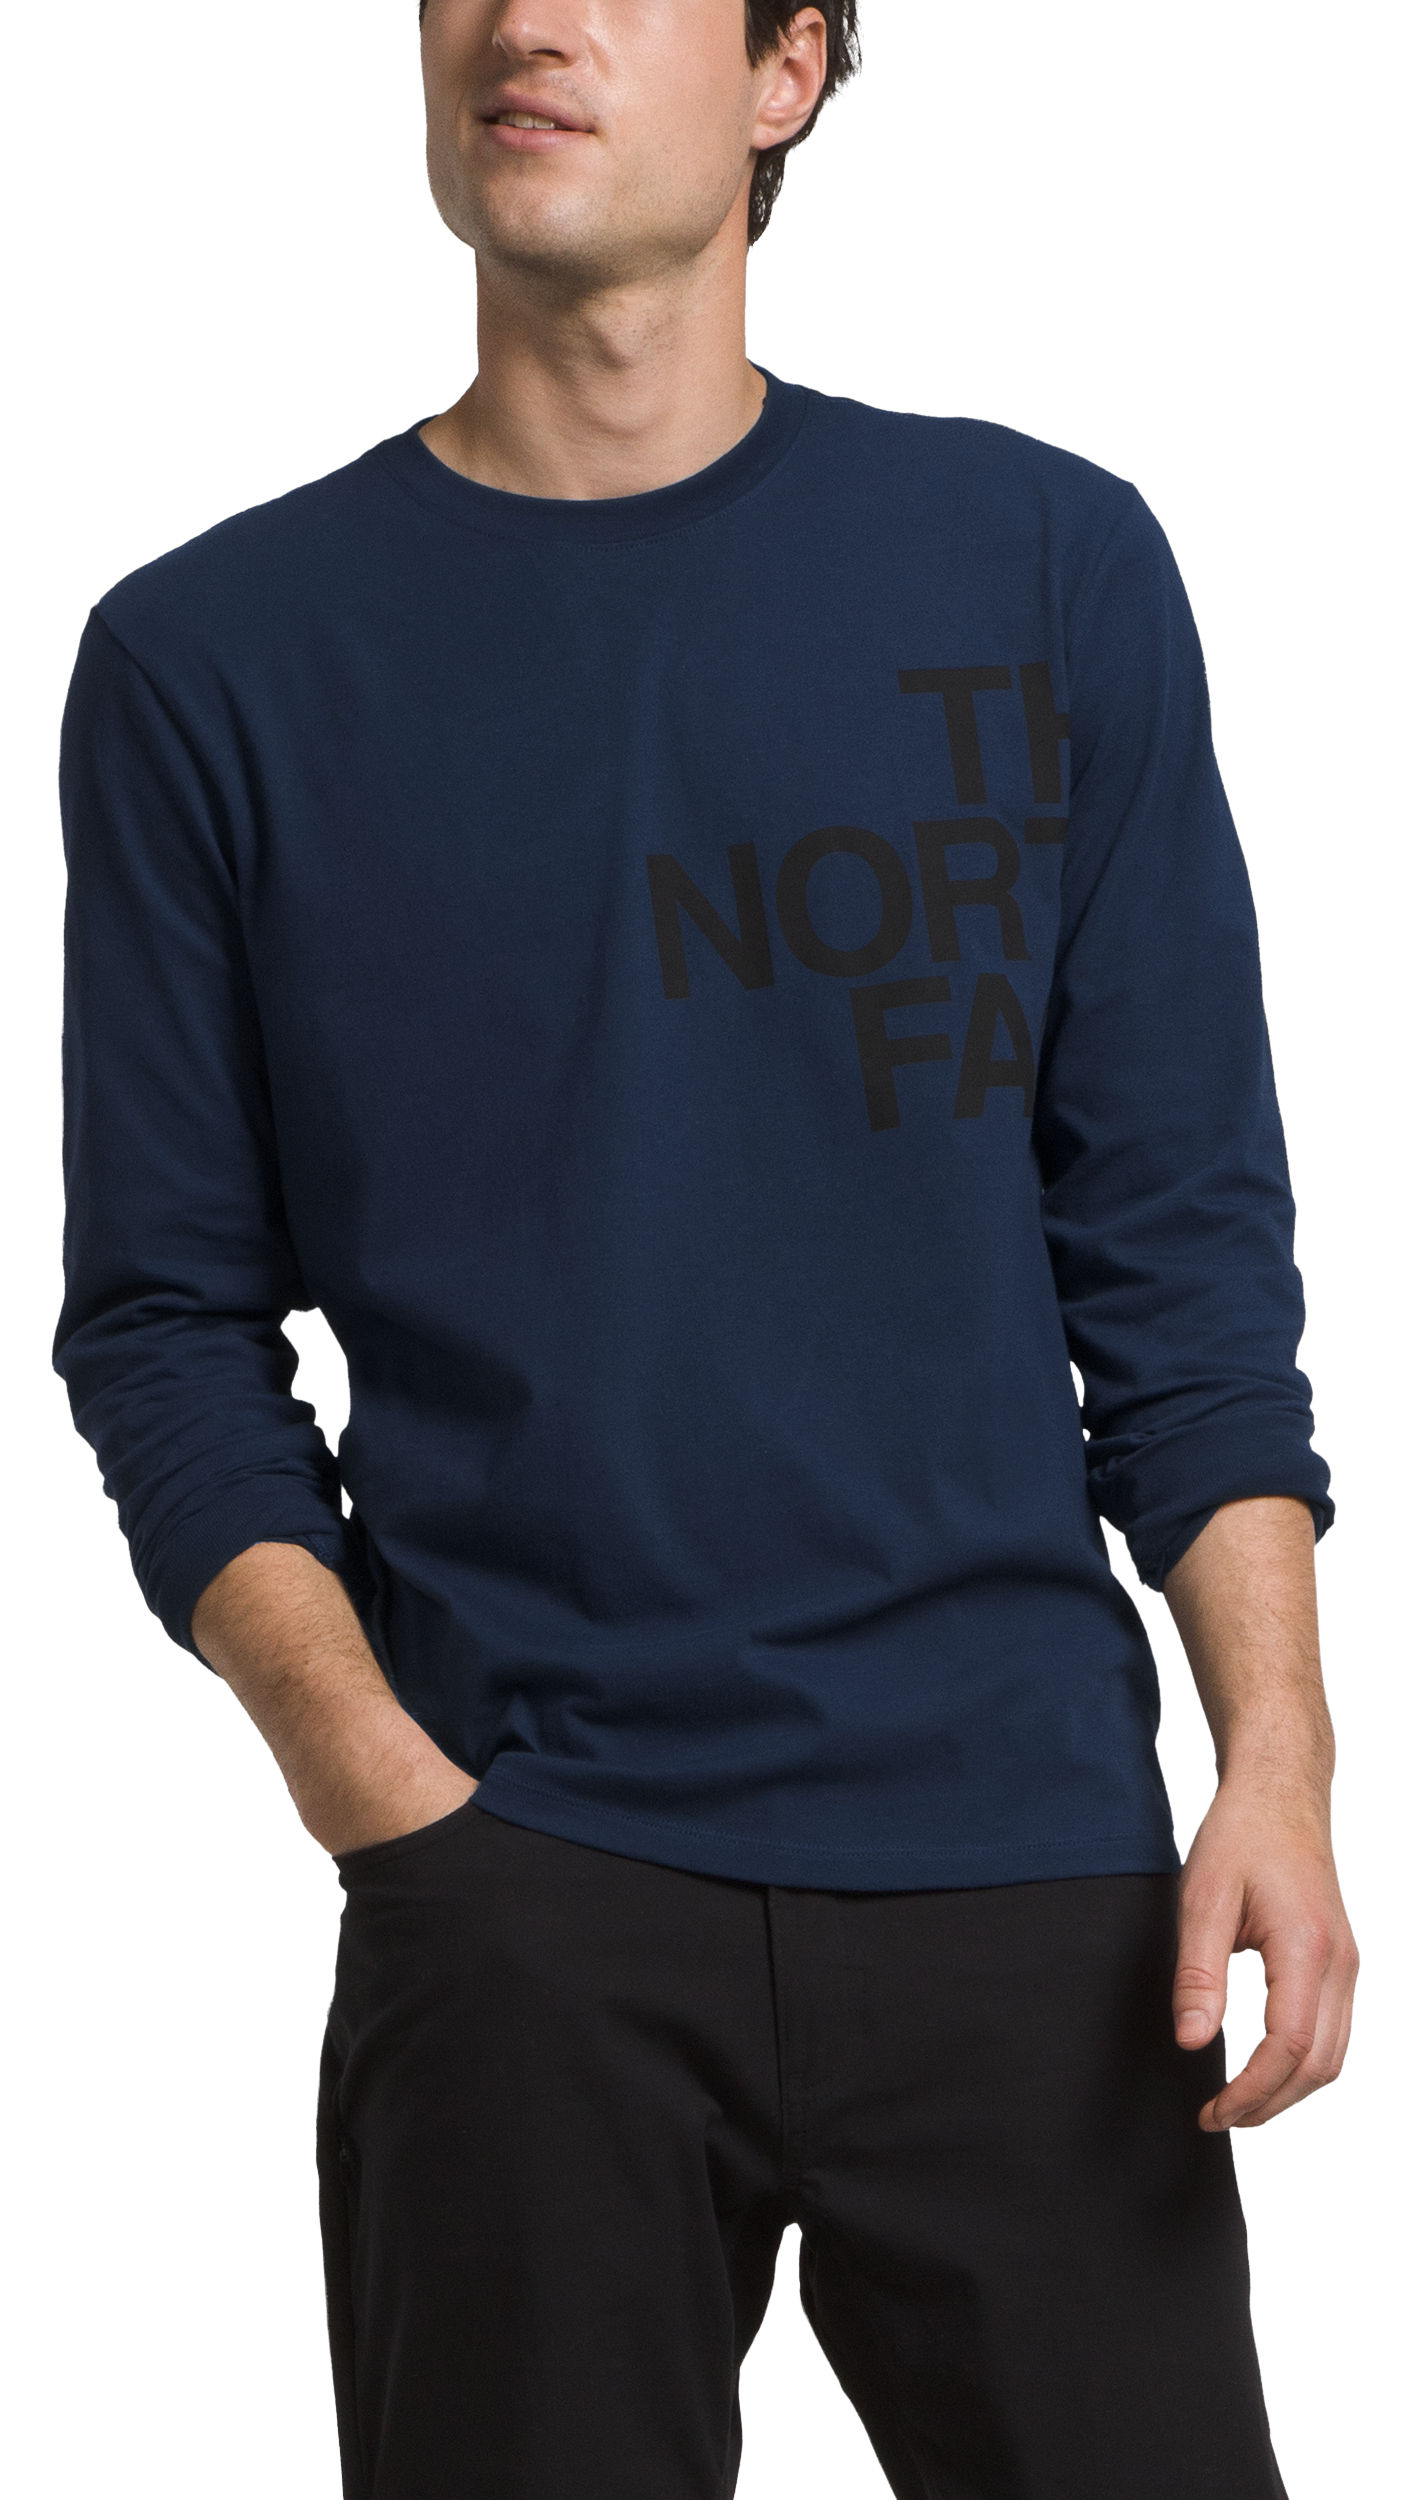 The North Face Brand Proud Long-Sleeve T-Shirt for Men - Summit Navy/TNF Black - M